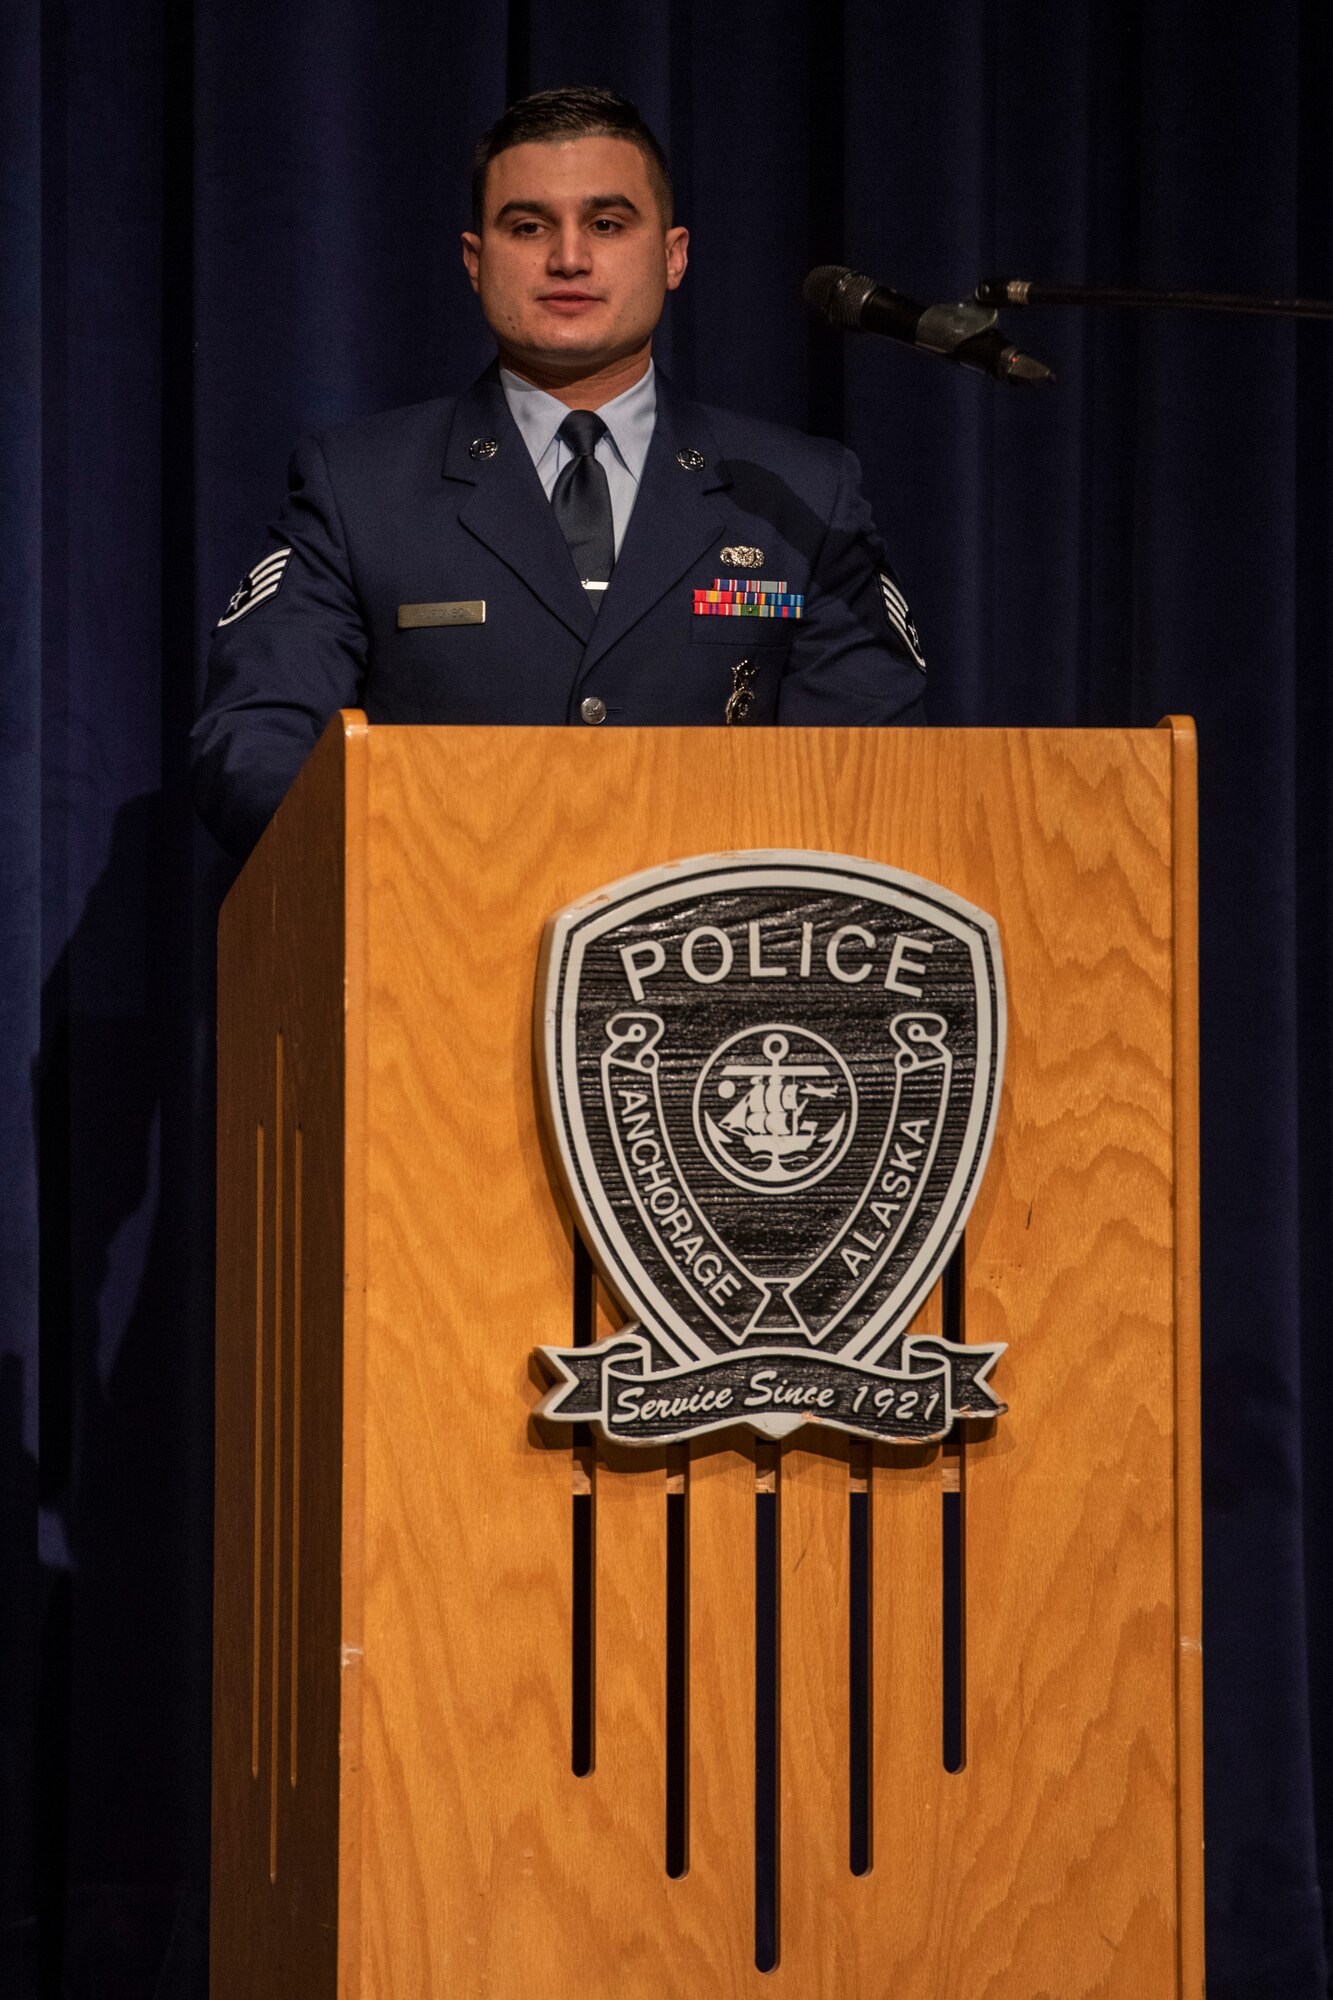 U.S. Air Force Staff Sgt. Ramses Alfonso, 673d Security Forces Squadron lead patrolman, speaks at his Anchorage Police Department 19-1 Academy graduation in Anchorage, Alaska, Dec. 5, 2019. When Alfonso was in fifth grade, he immigrated to the United States from Cuba and learned English. Alfonso earned the Distinguished Honor Graduate Award, Class Valedictorian, Top Shooter, and Top Defensive Driver in the Emergency Vehicle Operations Course. The partnership between the squadron and the Anchorage Police Department provides Airmen with a clearer understanding of municipal police procedures as well as builds contacts with all partner law enforcement agencies who participate in the academy.